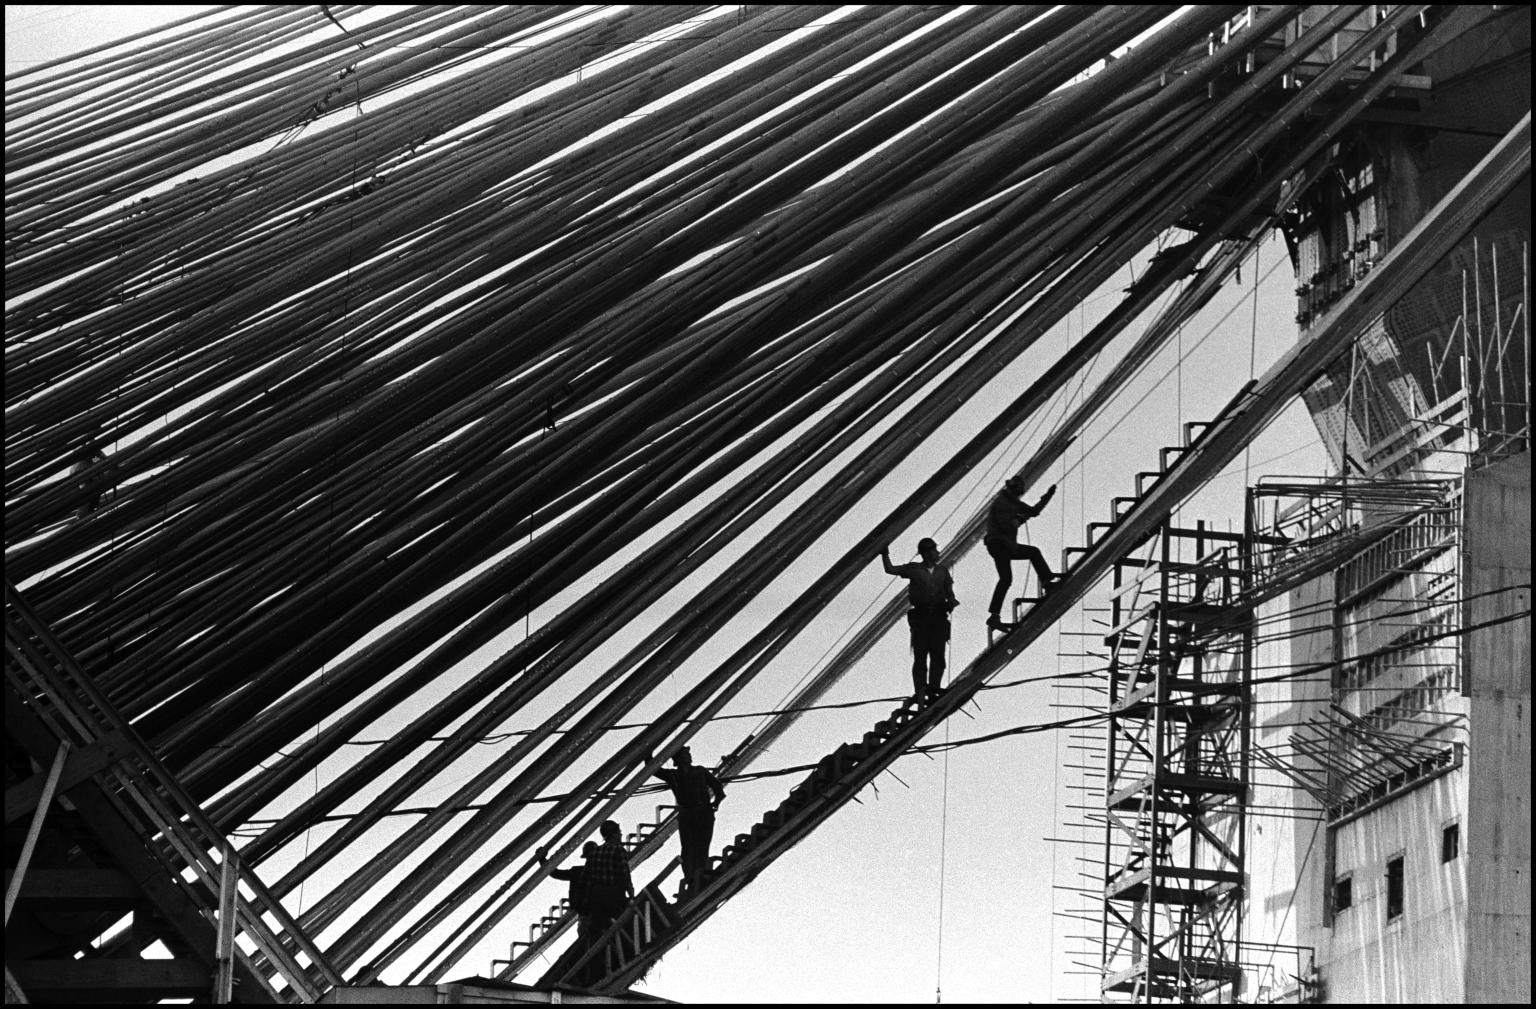 Photograph of men silhouetted on a steep ladder that bisects the photograph on a diagonal, below cables that run across the photograph, and tall building in background.